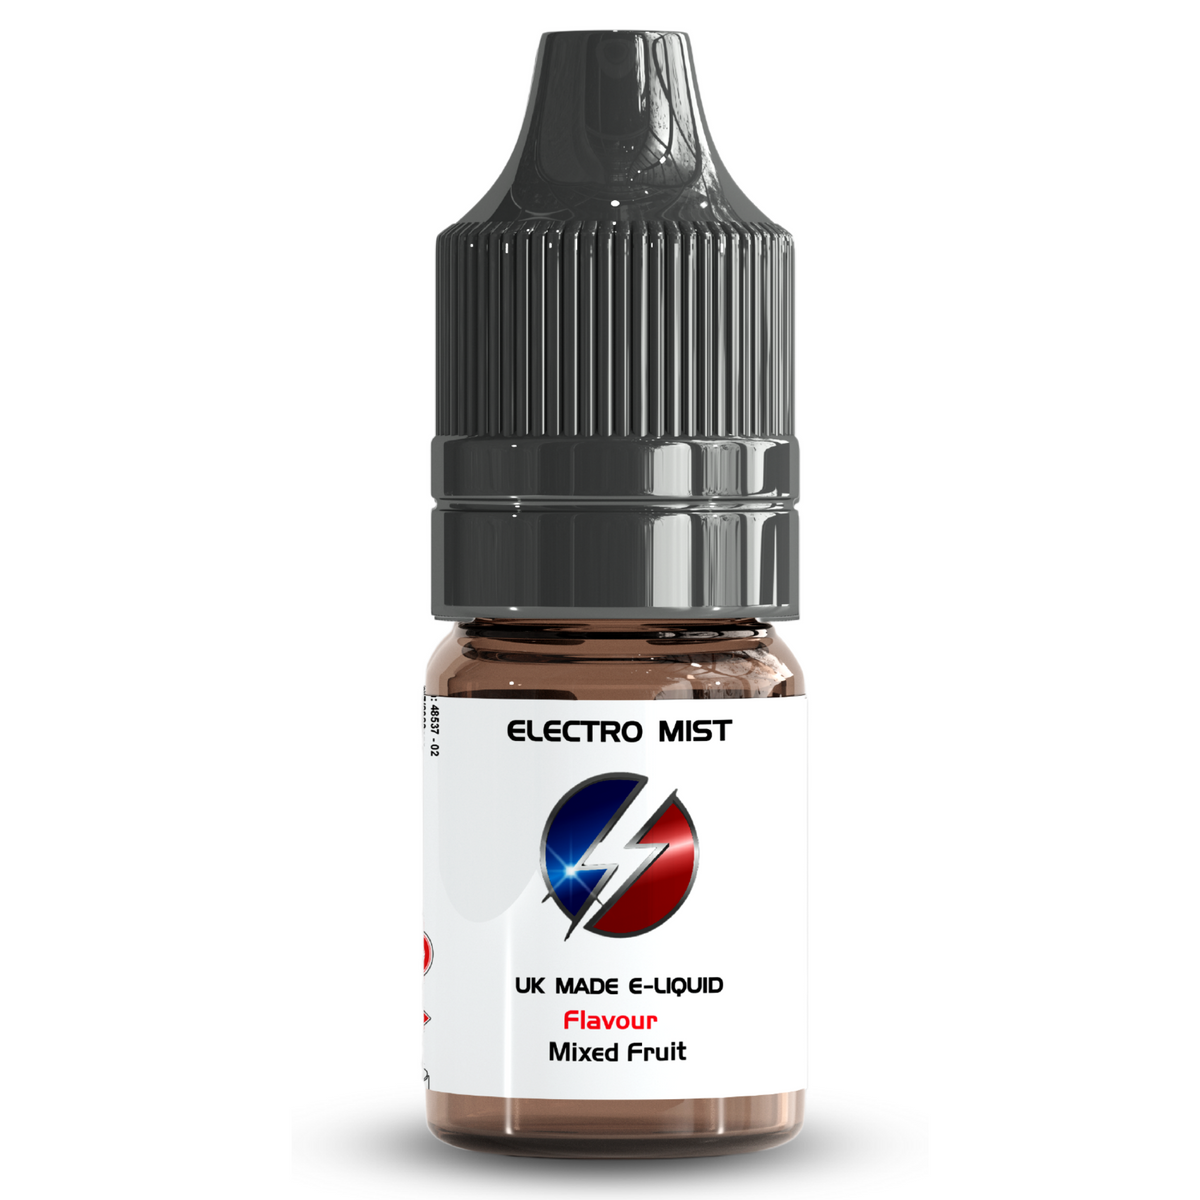 Electromist, the e-liquid brand you can trust. Get your taste buds ready for a flavour sensation, Mixed Fruit. Nicotine Content: 3mg/6mg/12mg. Products may contain nicotine. For over 18s Only ejuice, vape pen, eliquid, e cigarette, 10ml, vaping, cloud, PG, VG, 60/40, vape liquid, Flavour